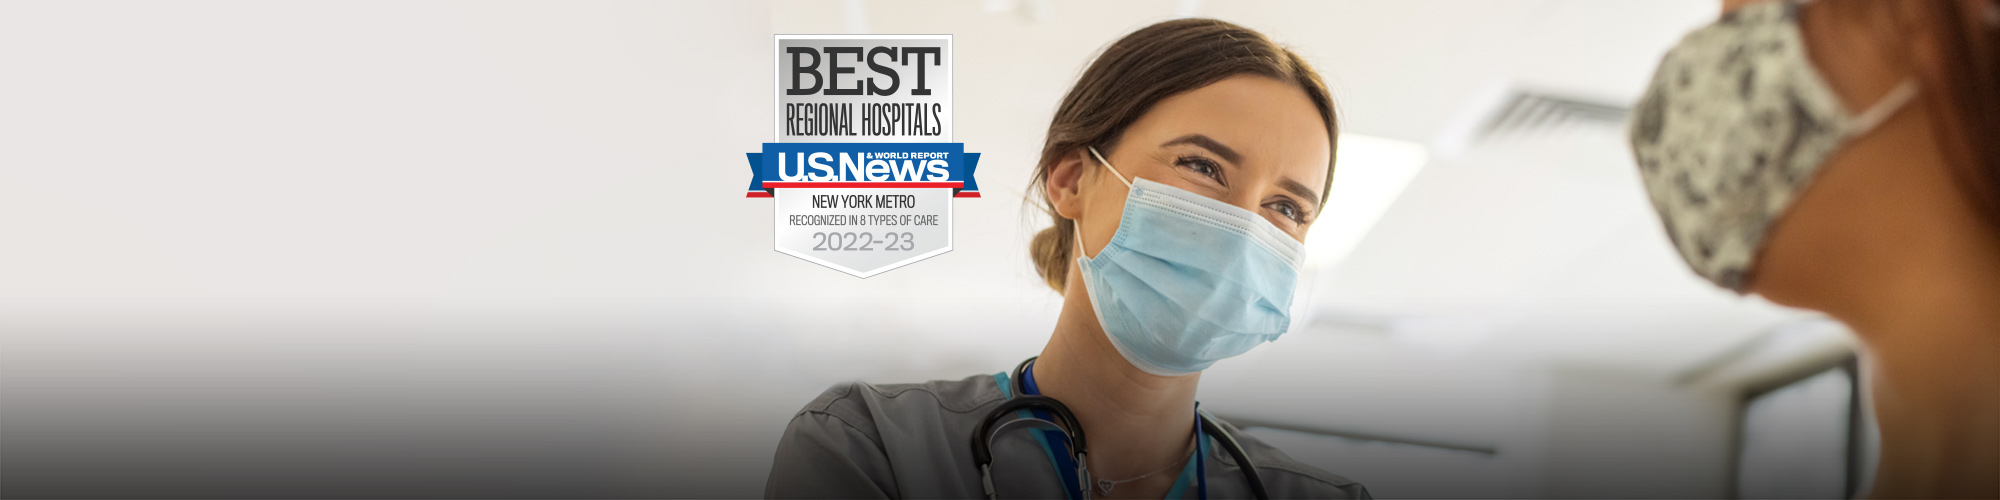  Ranked Among the Best Regional Hospitals in the Metro Area Rated High Performing in Eight Types of Care ... LEARN MORE> 